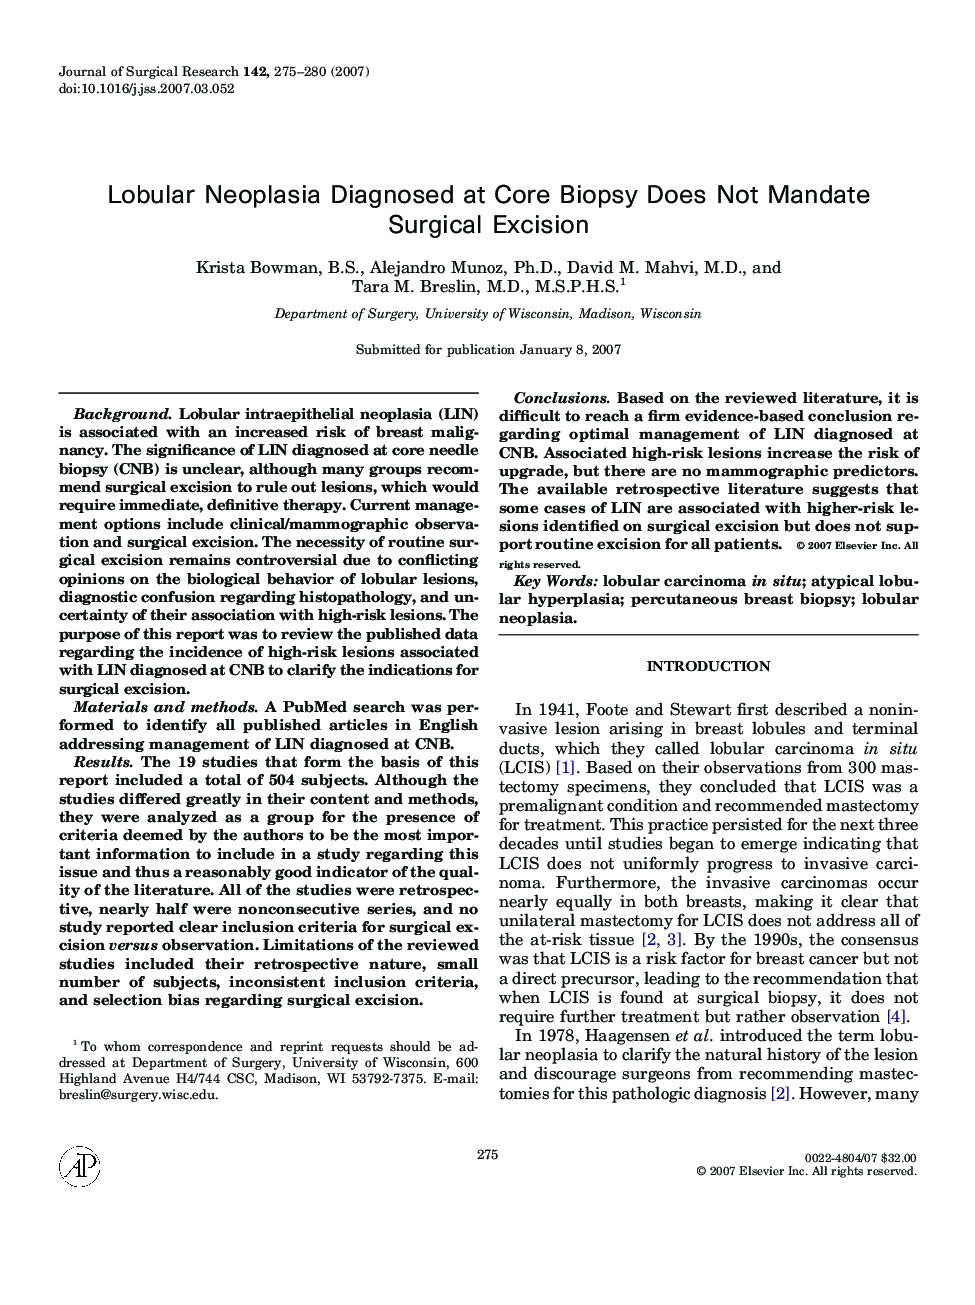 Lobular Neoplasia Diagnosed at Core Biopsy Does Not Mandate Surgical Excision